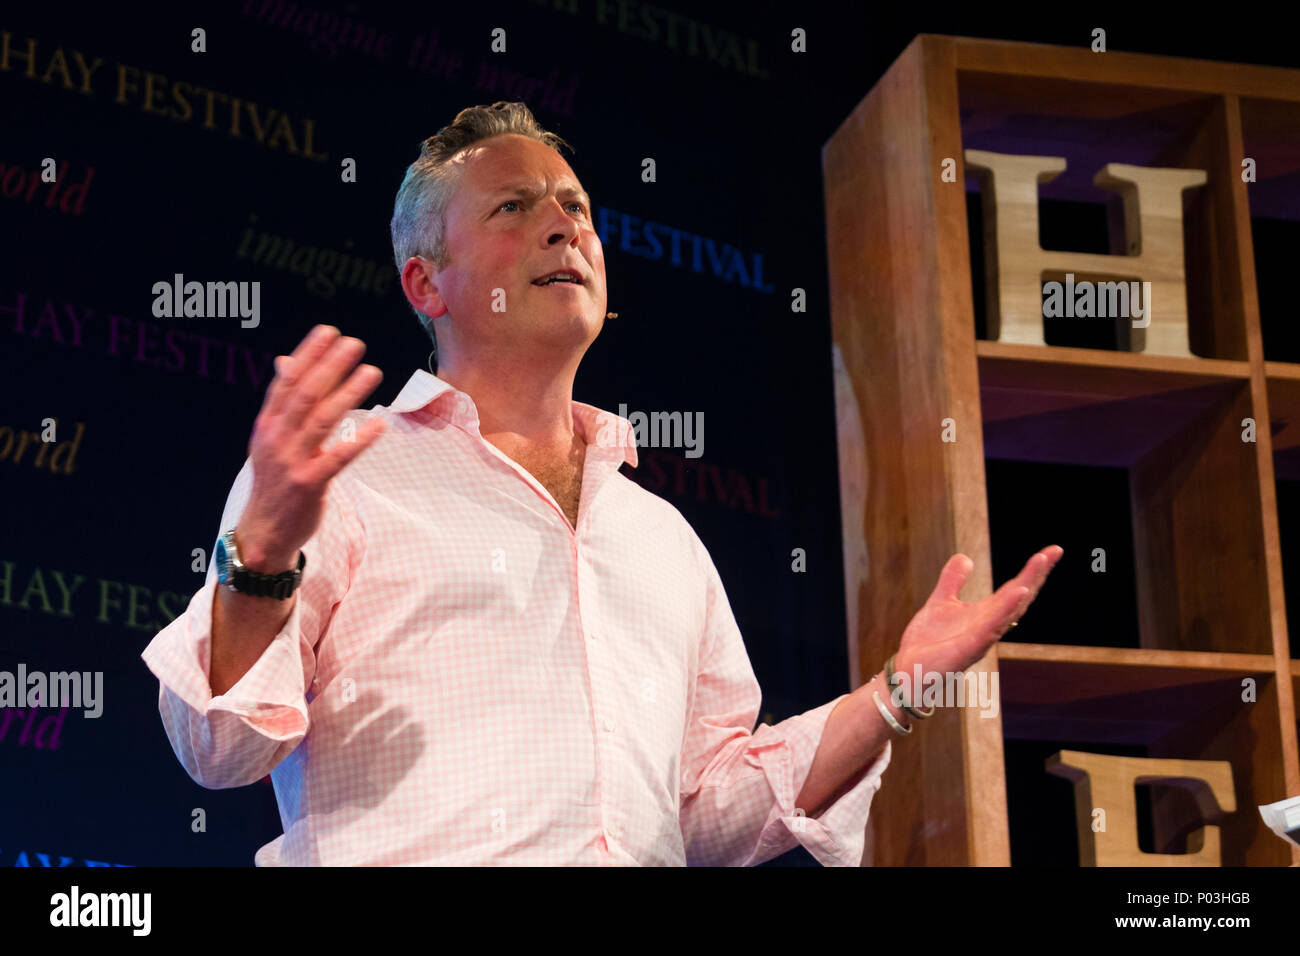 JULES HUDSON, archaeologist, historian,  BBC television presenter (Escape to the Country, Countryfile) , speaking about his passion for walled gardens at the Hay Festival  of Literature and the Arts, May 2018 Stock Photo